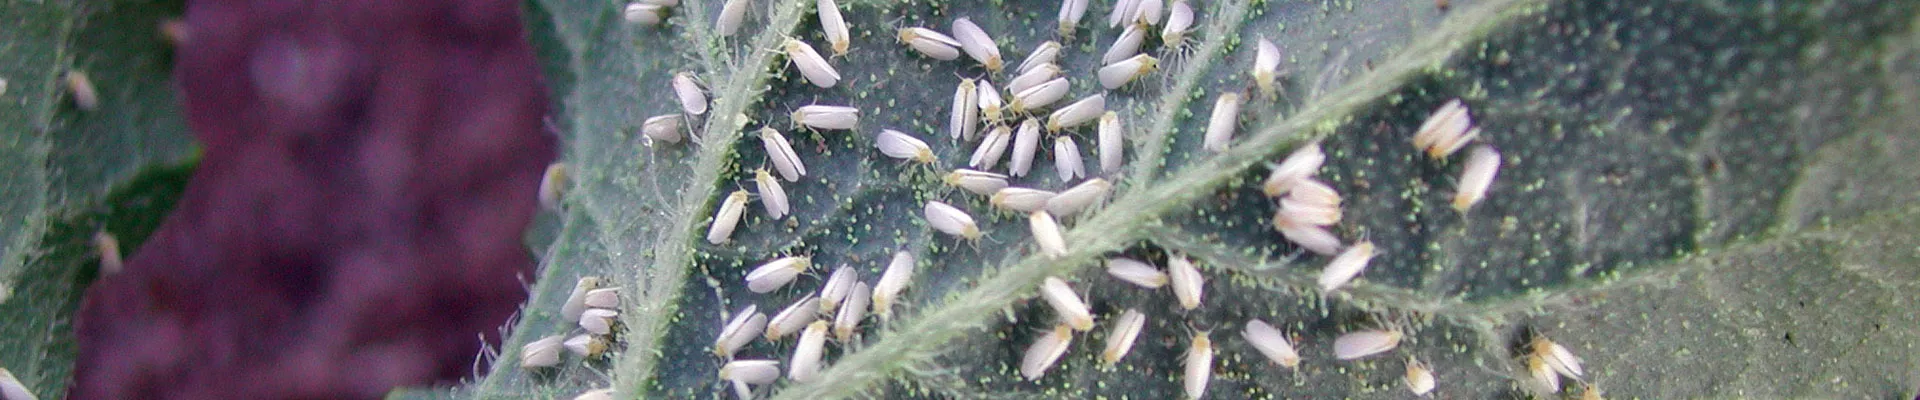 Whitefly - Pests & Diseases